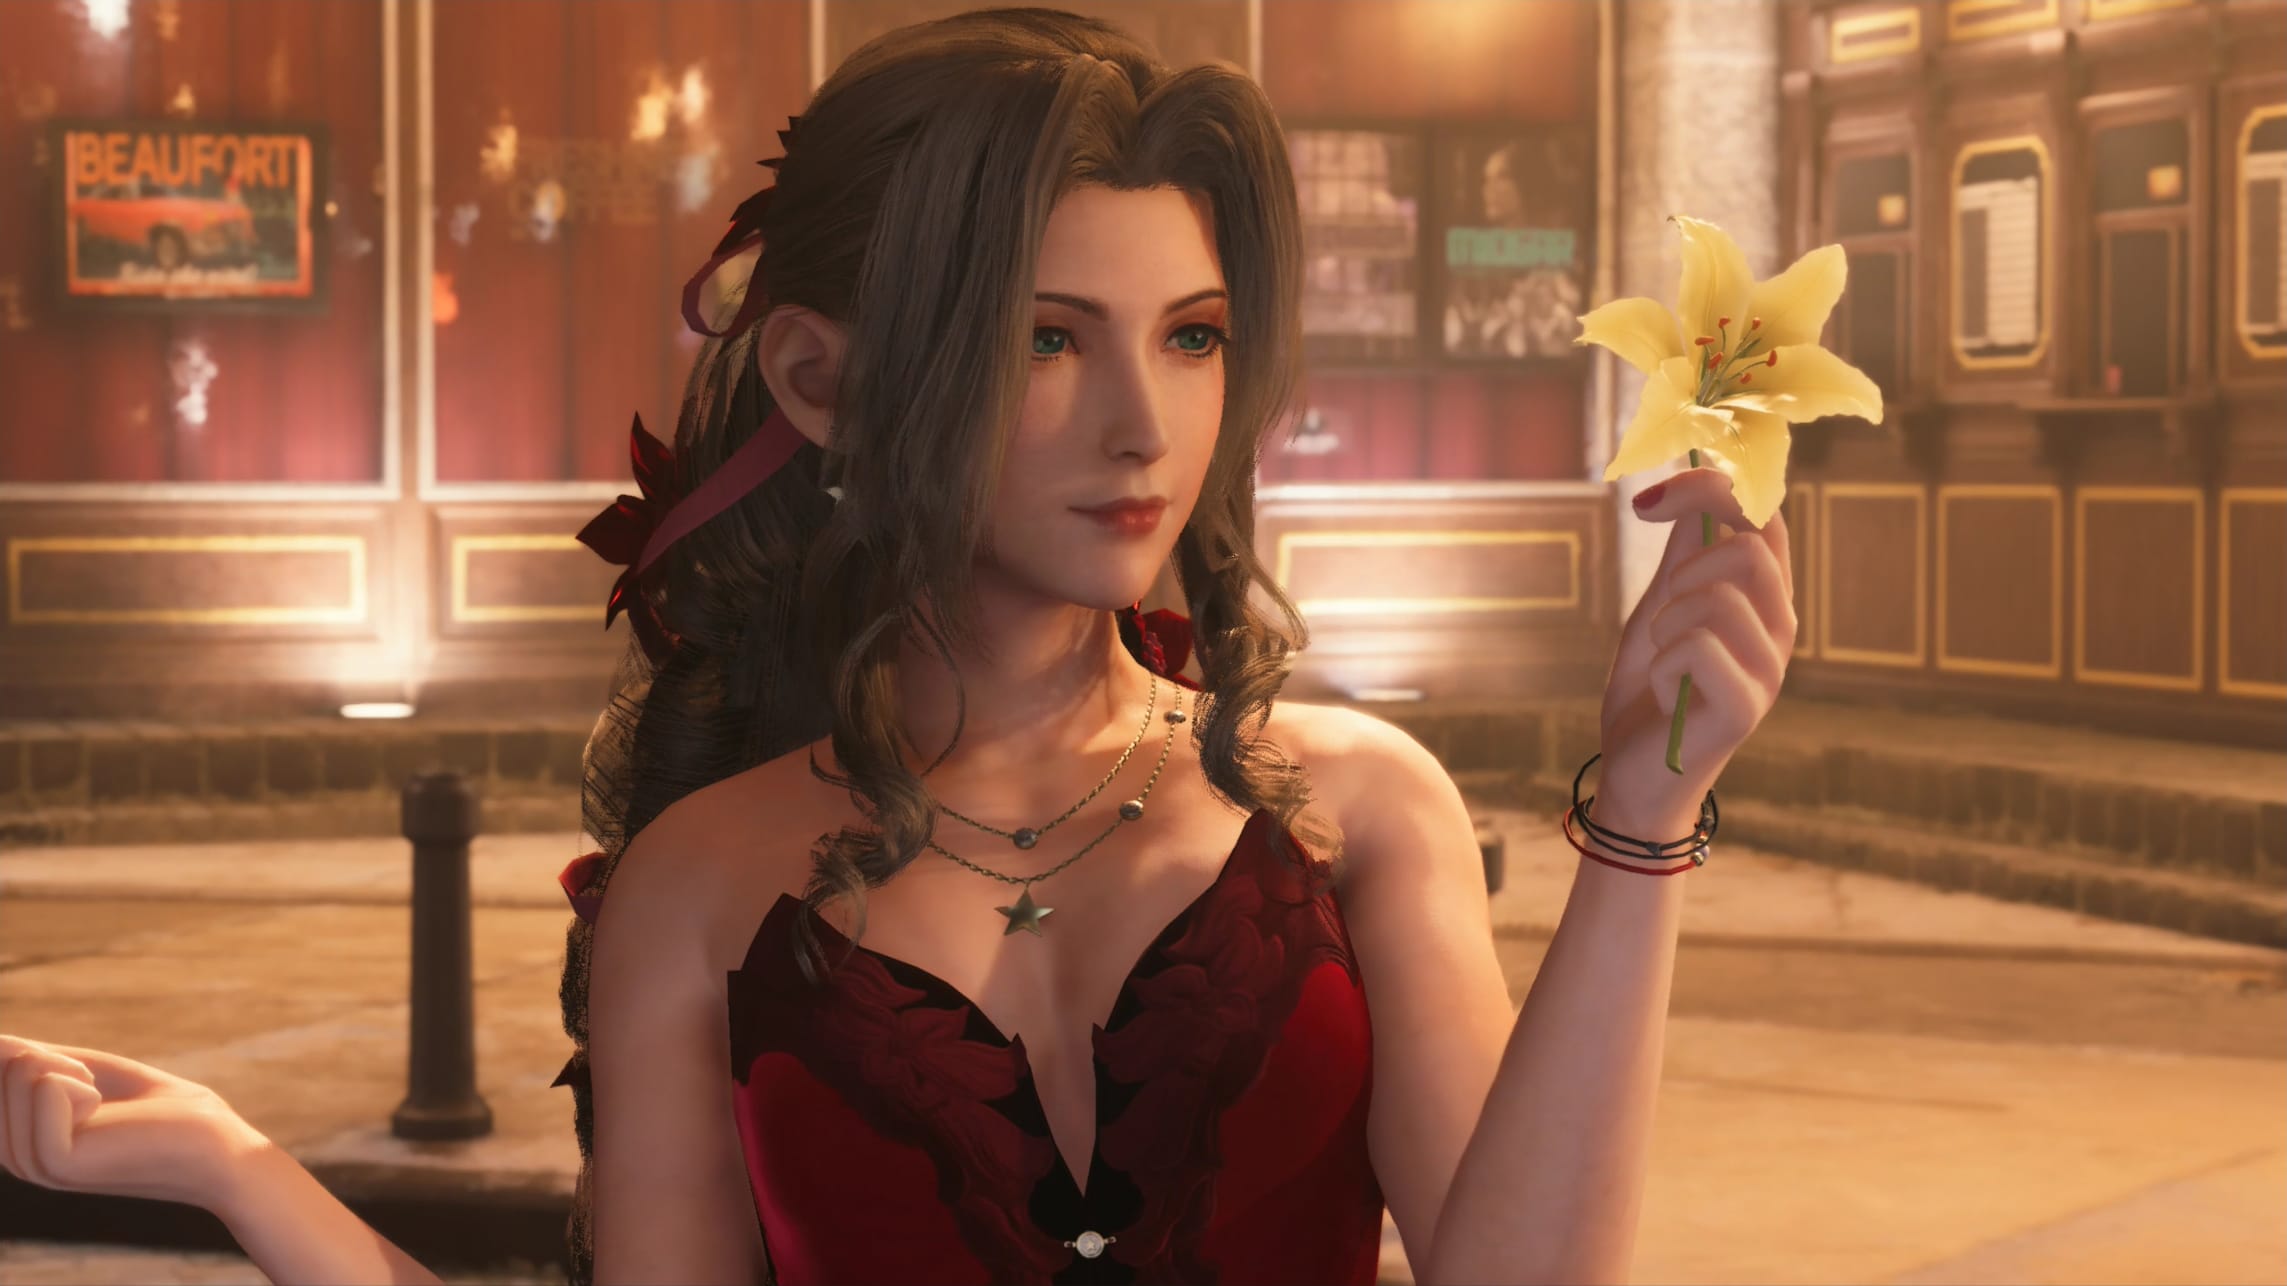 Aerith in her Red Dress (Modded)